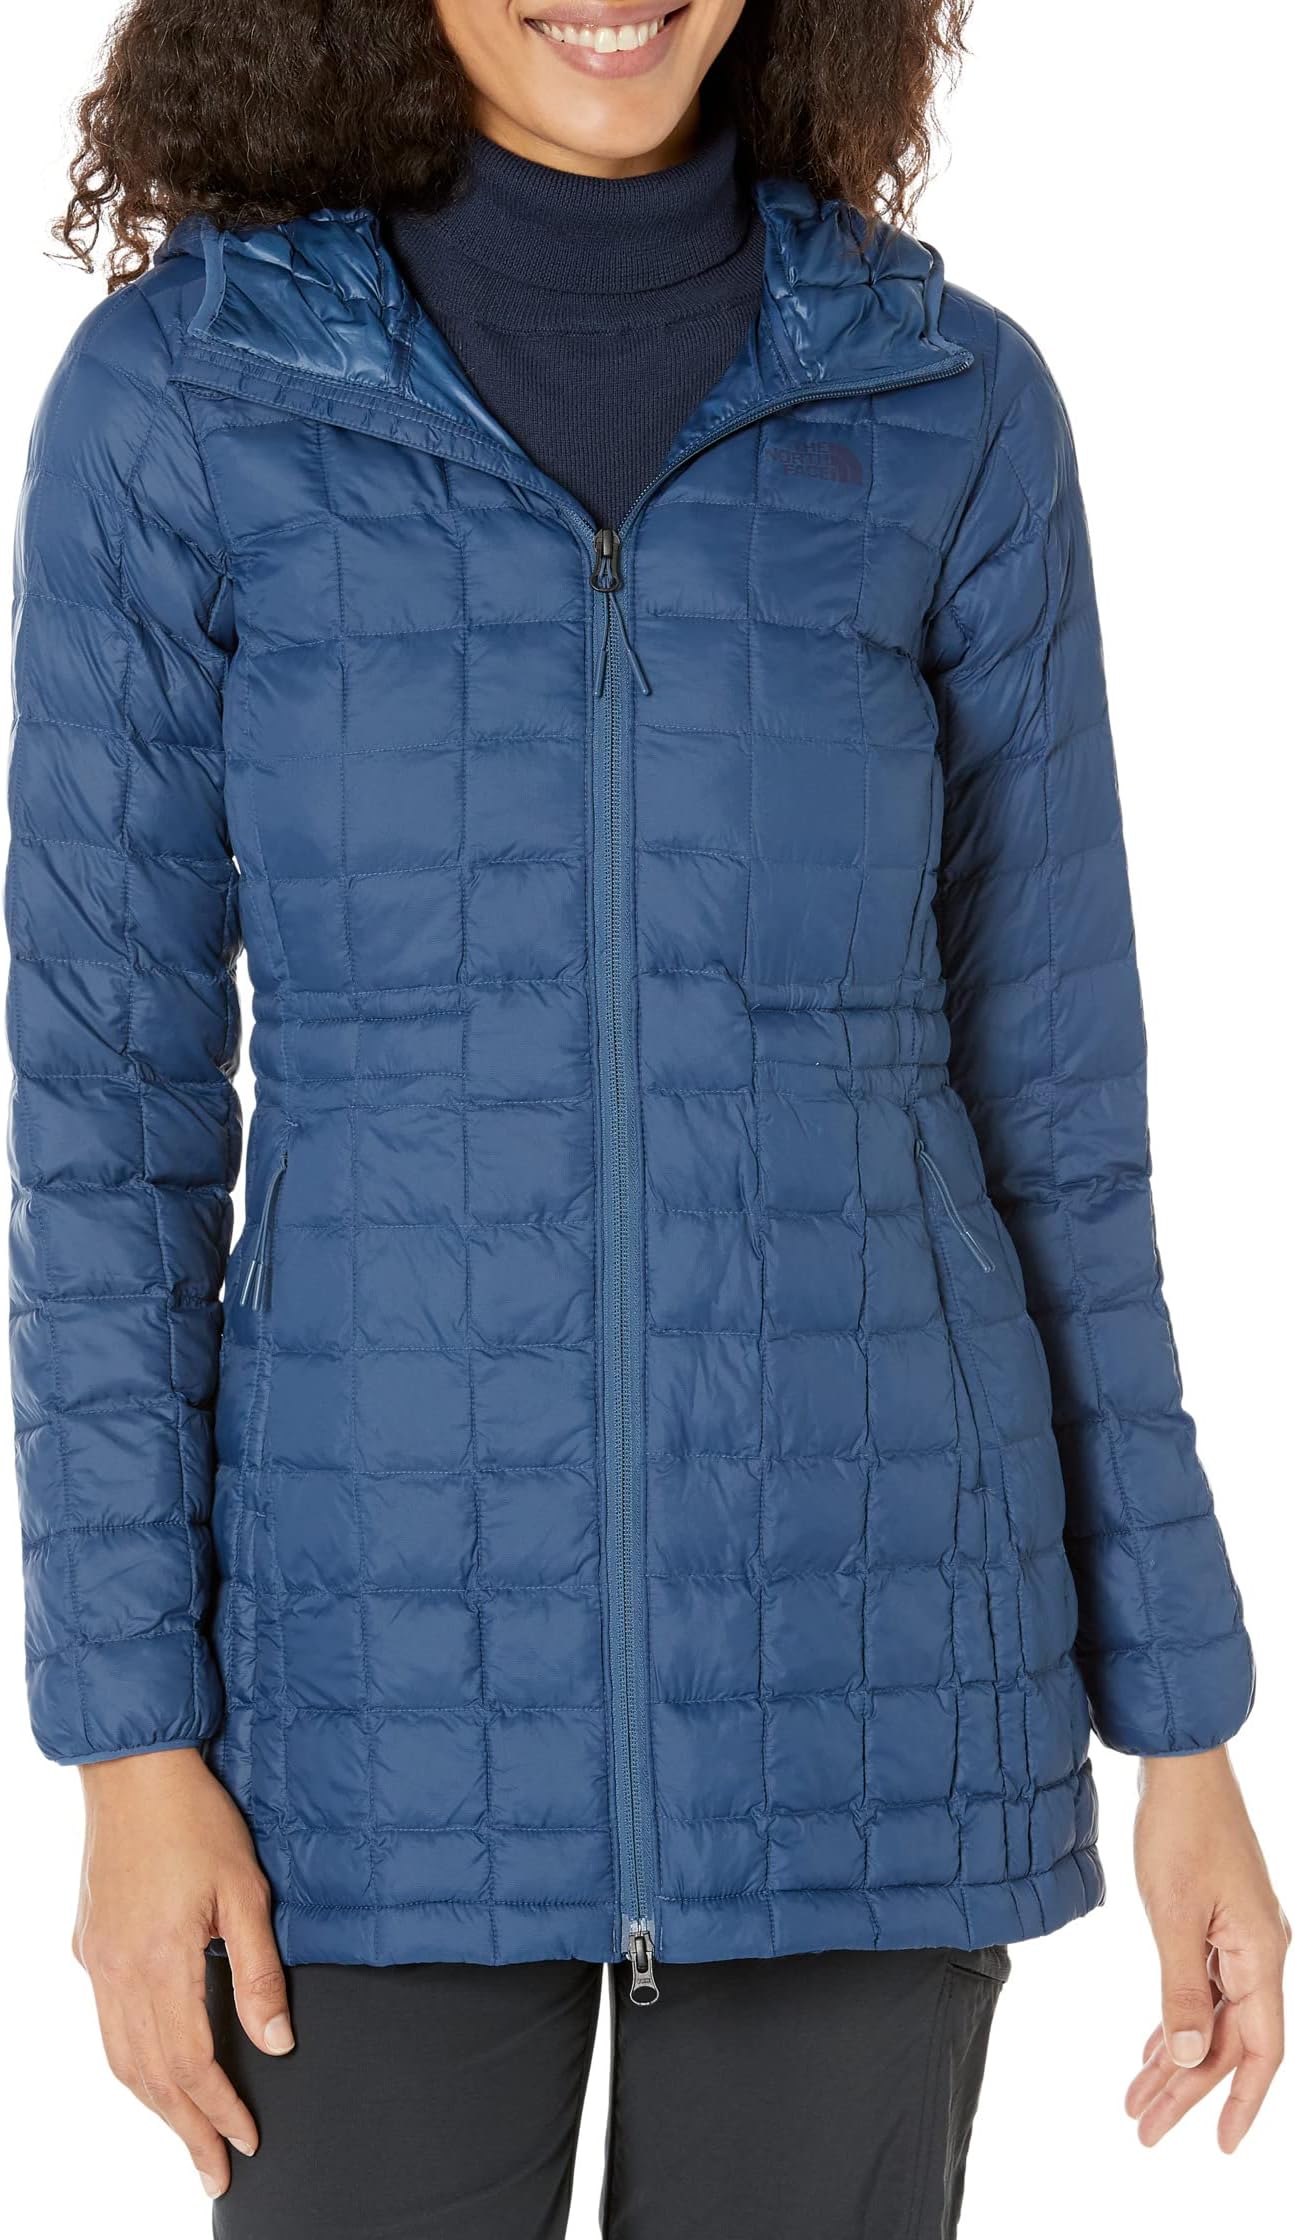 Парка Thermoball Eco Parka The North Face, цвет Shady Blue куртка the north face thermoball eco 2 0 plus цвет shady blue